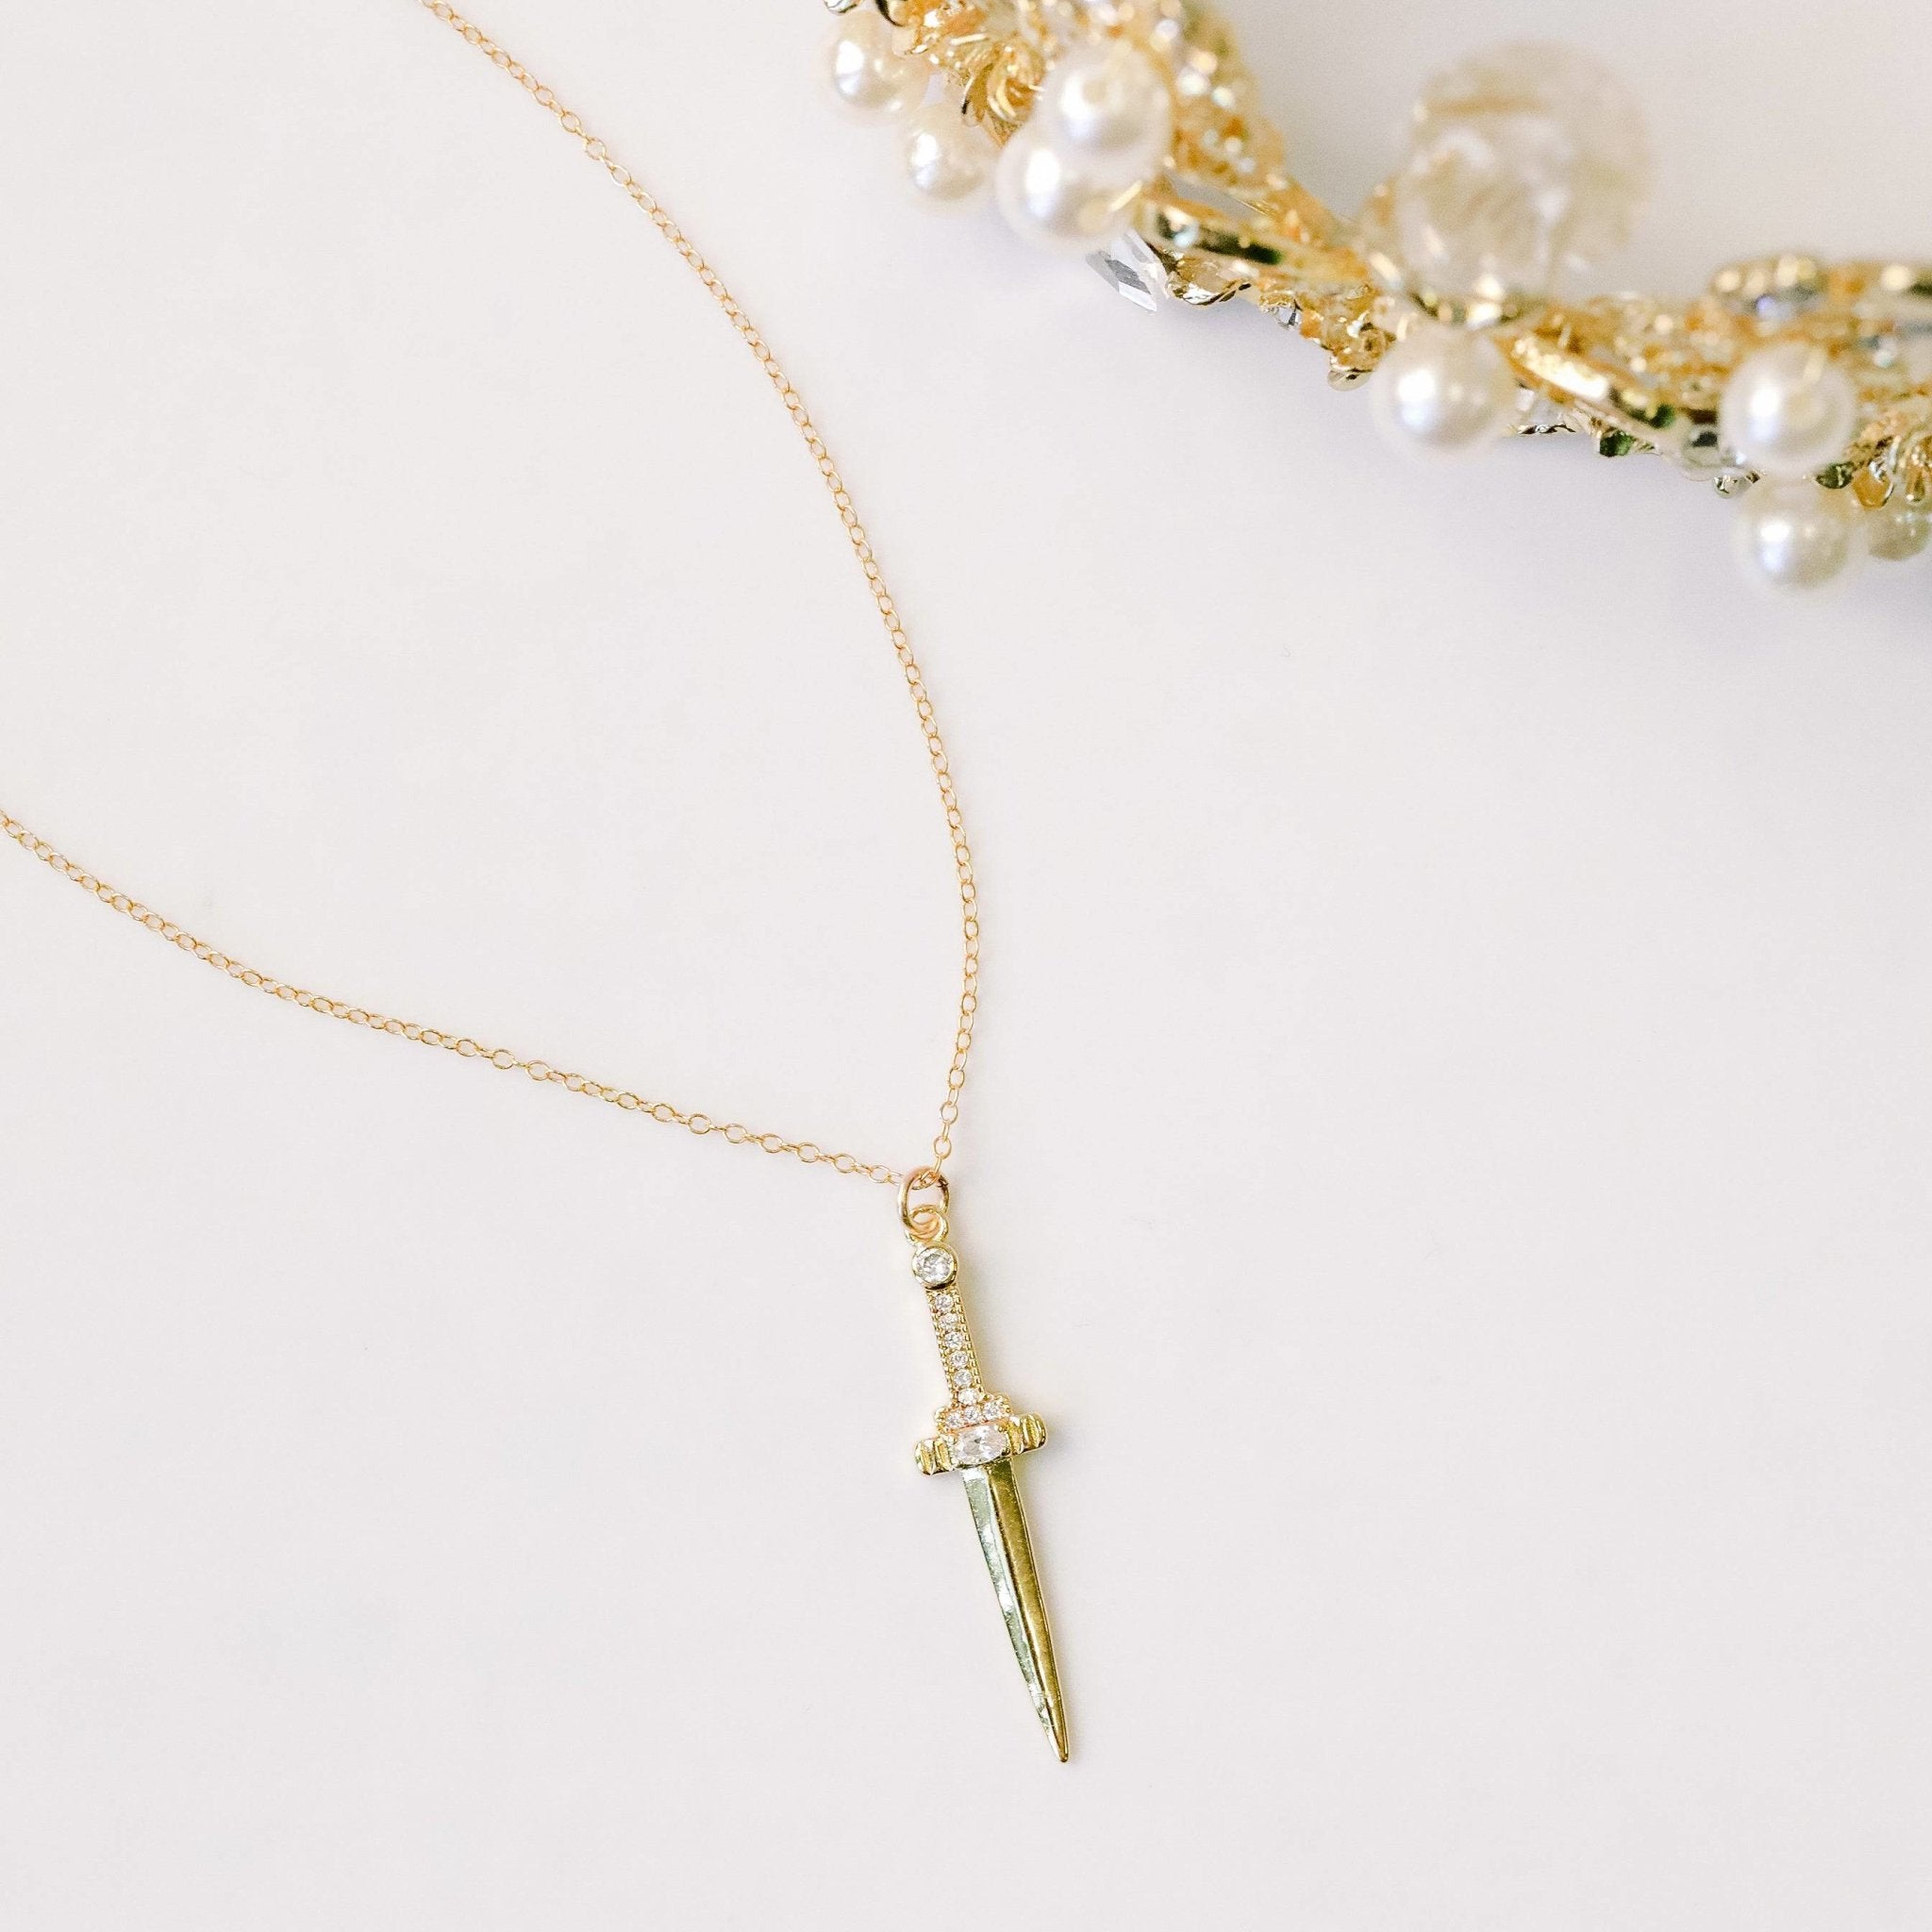 Athame Dagger Necklace - The Gilded Witch